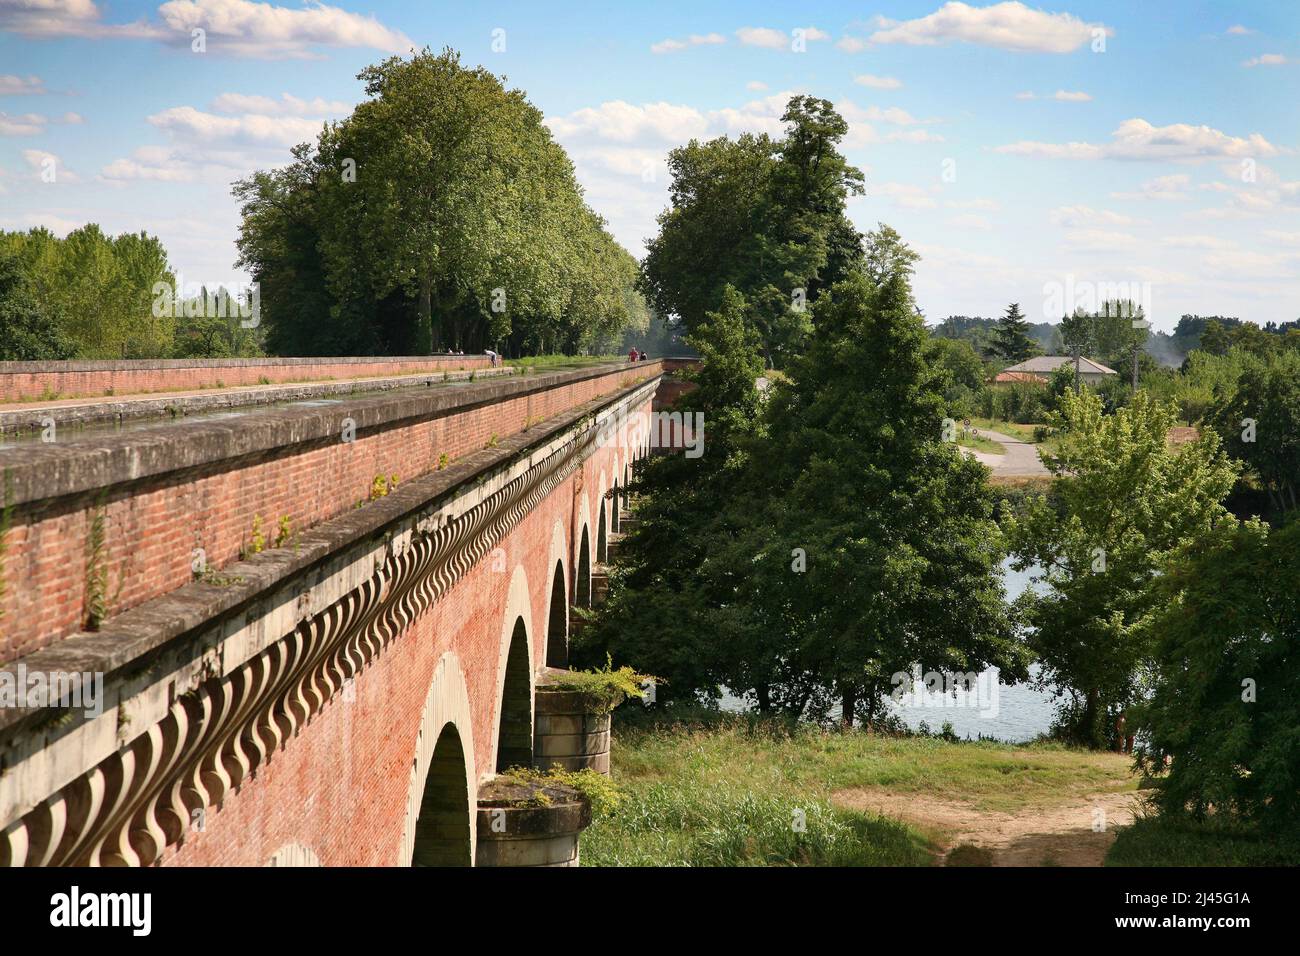 Moissac (south-western France): navigable aqueduct Òpont-canal du CacorÓ. Water bridge between the Garonne and the Tarn river. Detail of the arches in Stock Photo